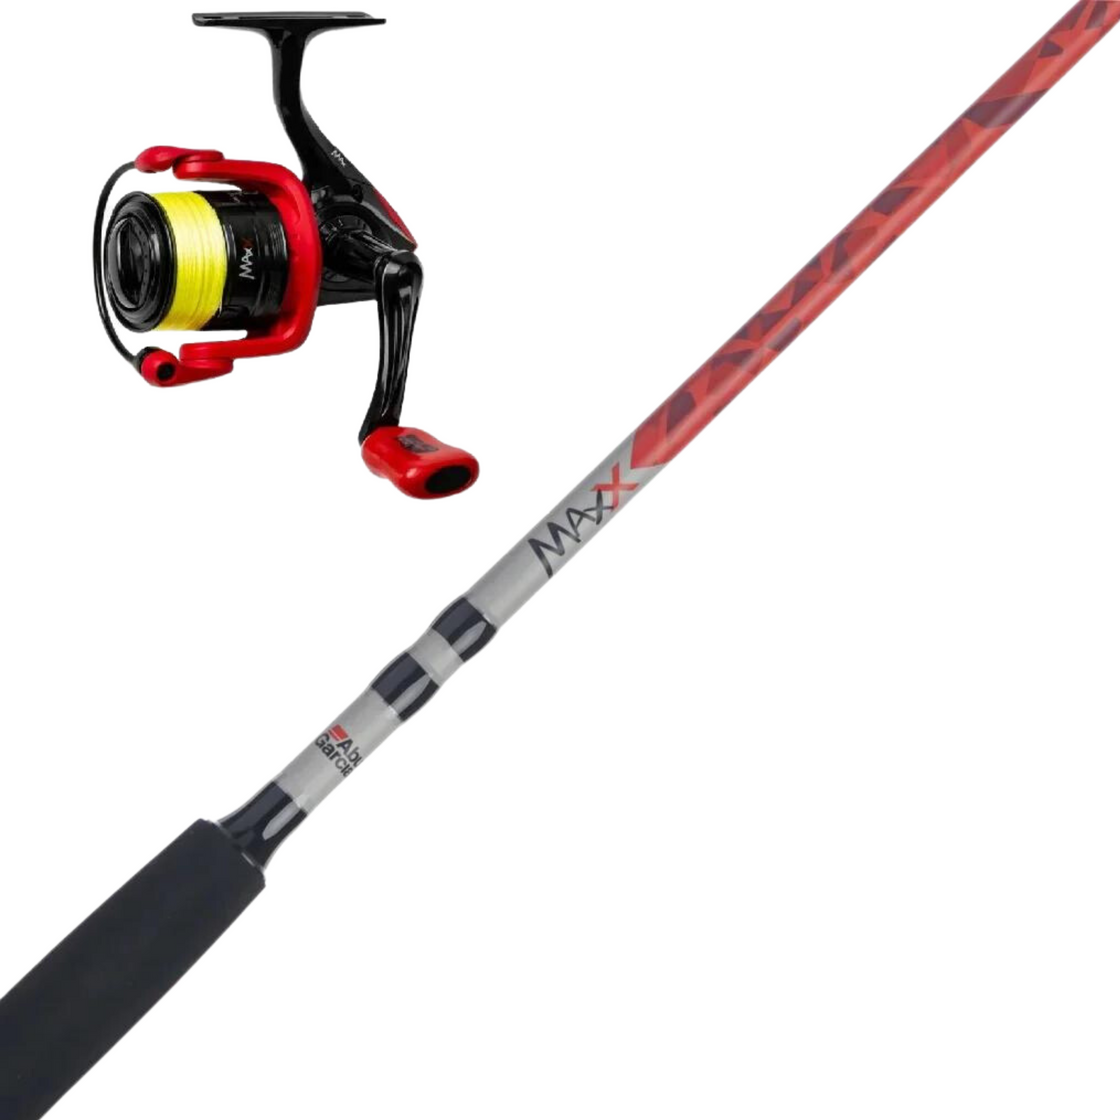 ABU MAX X SP20 702XL FRESHWATER SPINNING COMBO 7'8 1-3KG